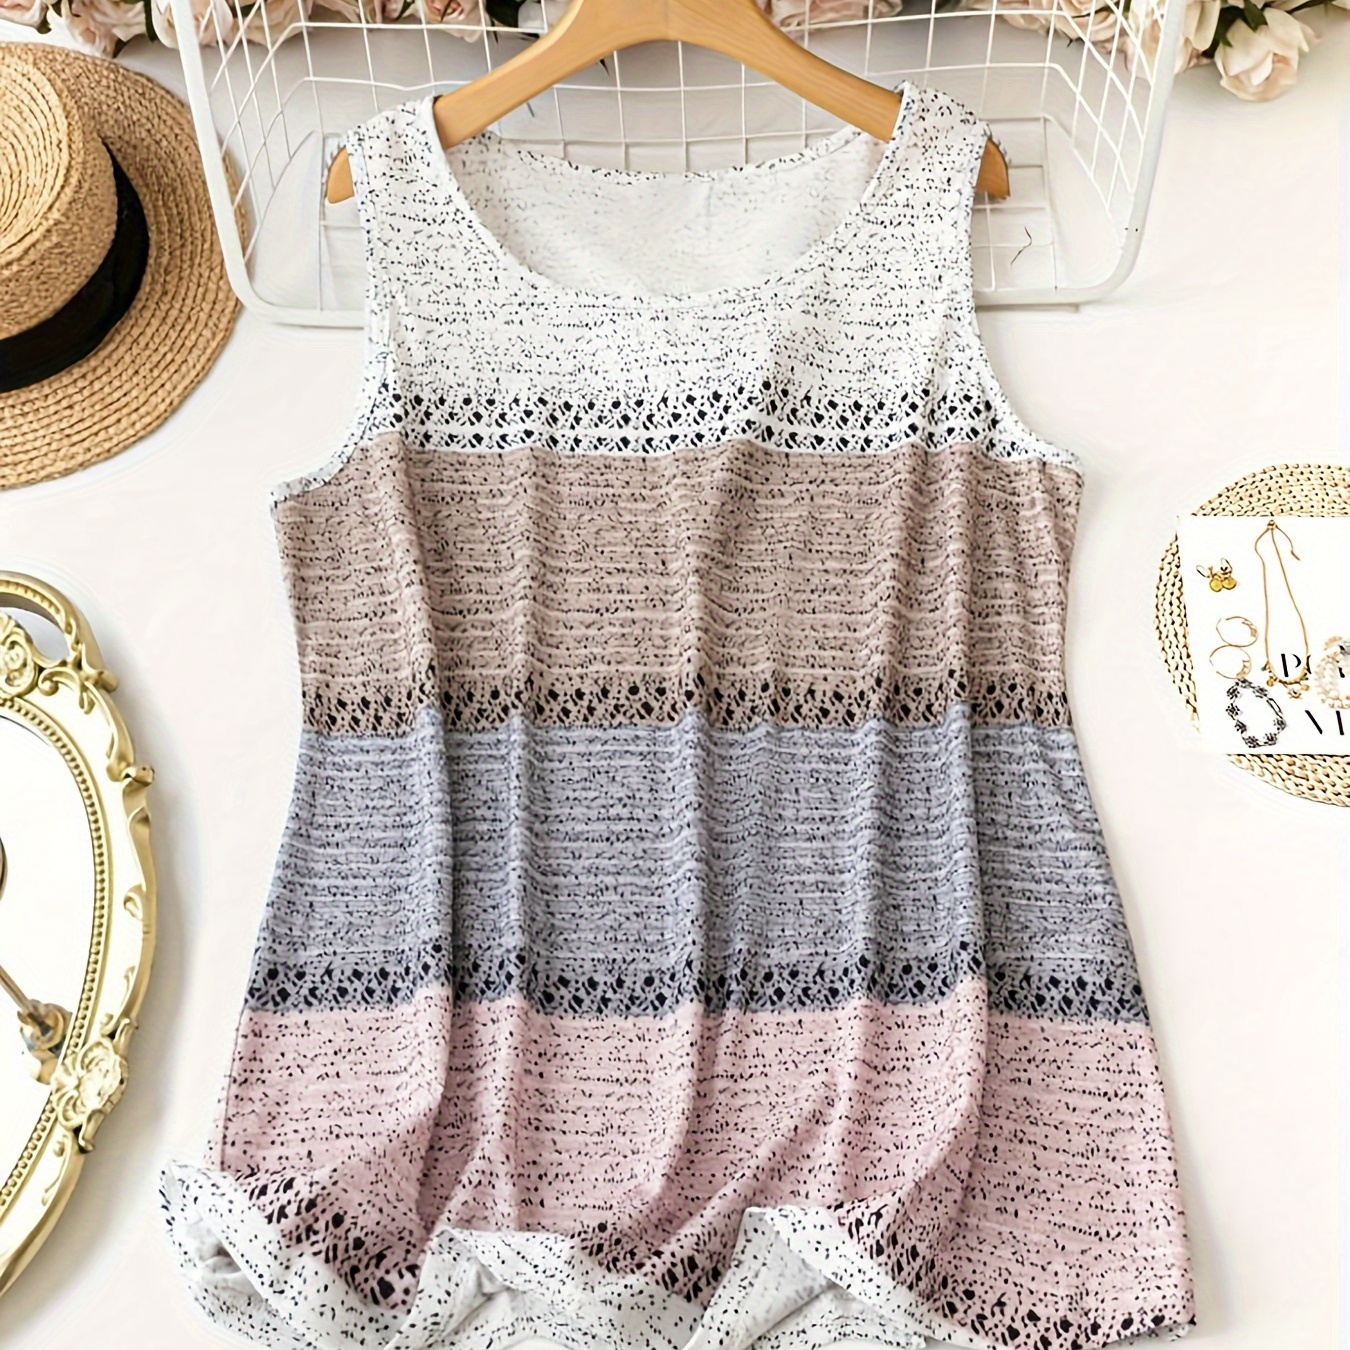 

Plus Size Stripe Print Lace Stitching Tank Top, Casual Crew Neck Sleeveless Top For Summer, Women's Plus Size Clothing